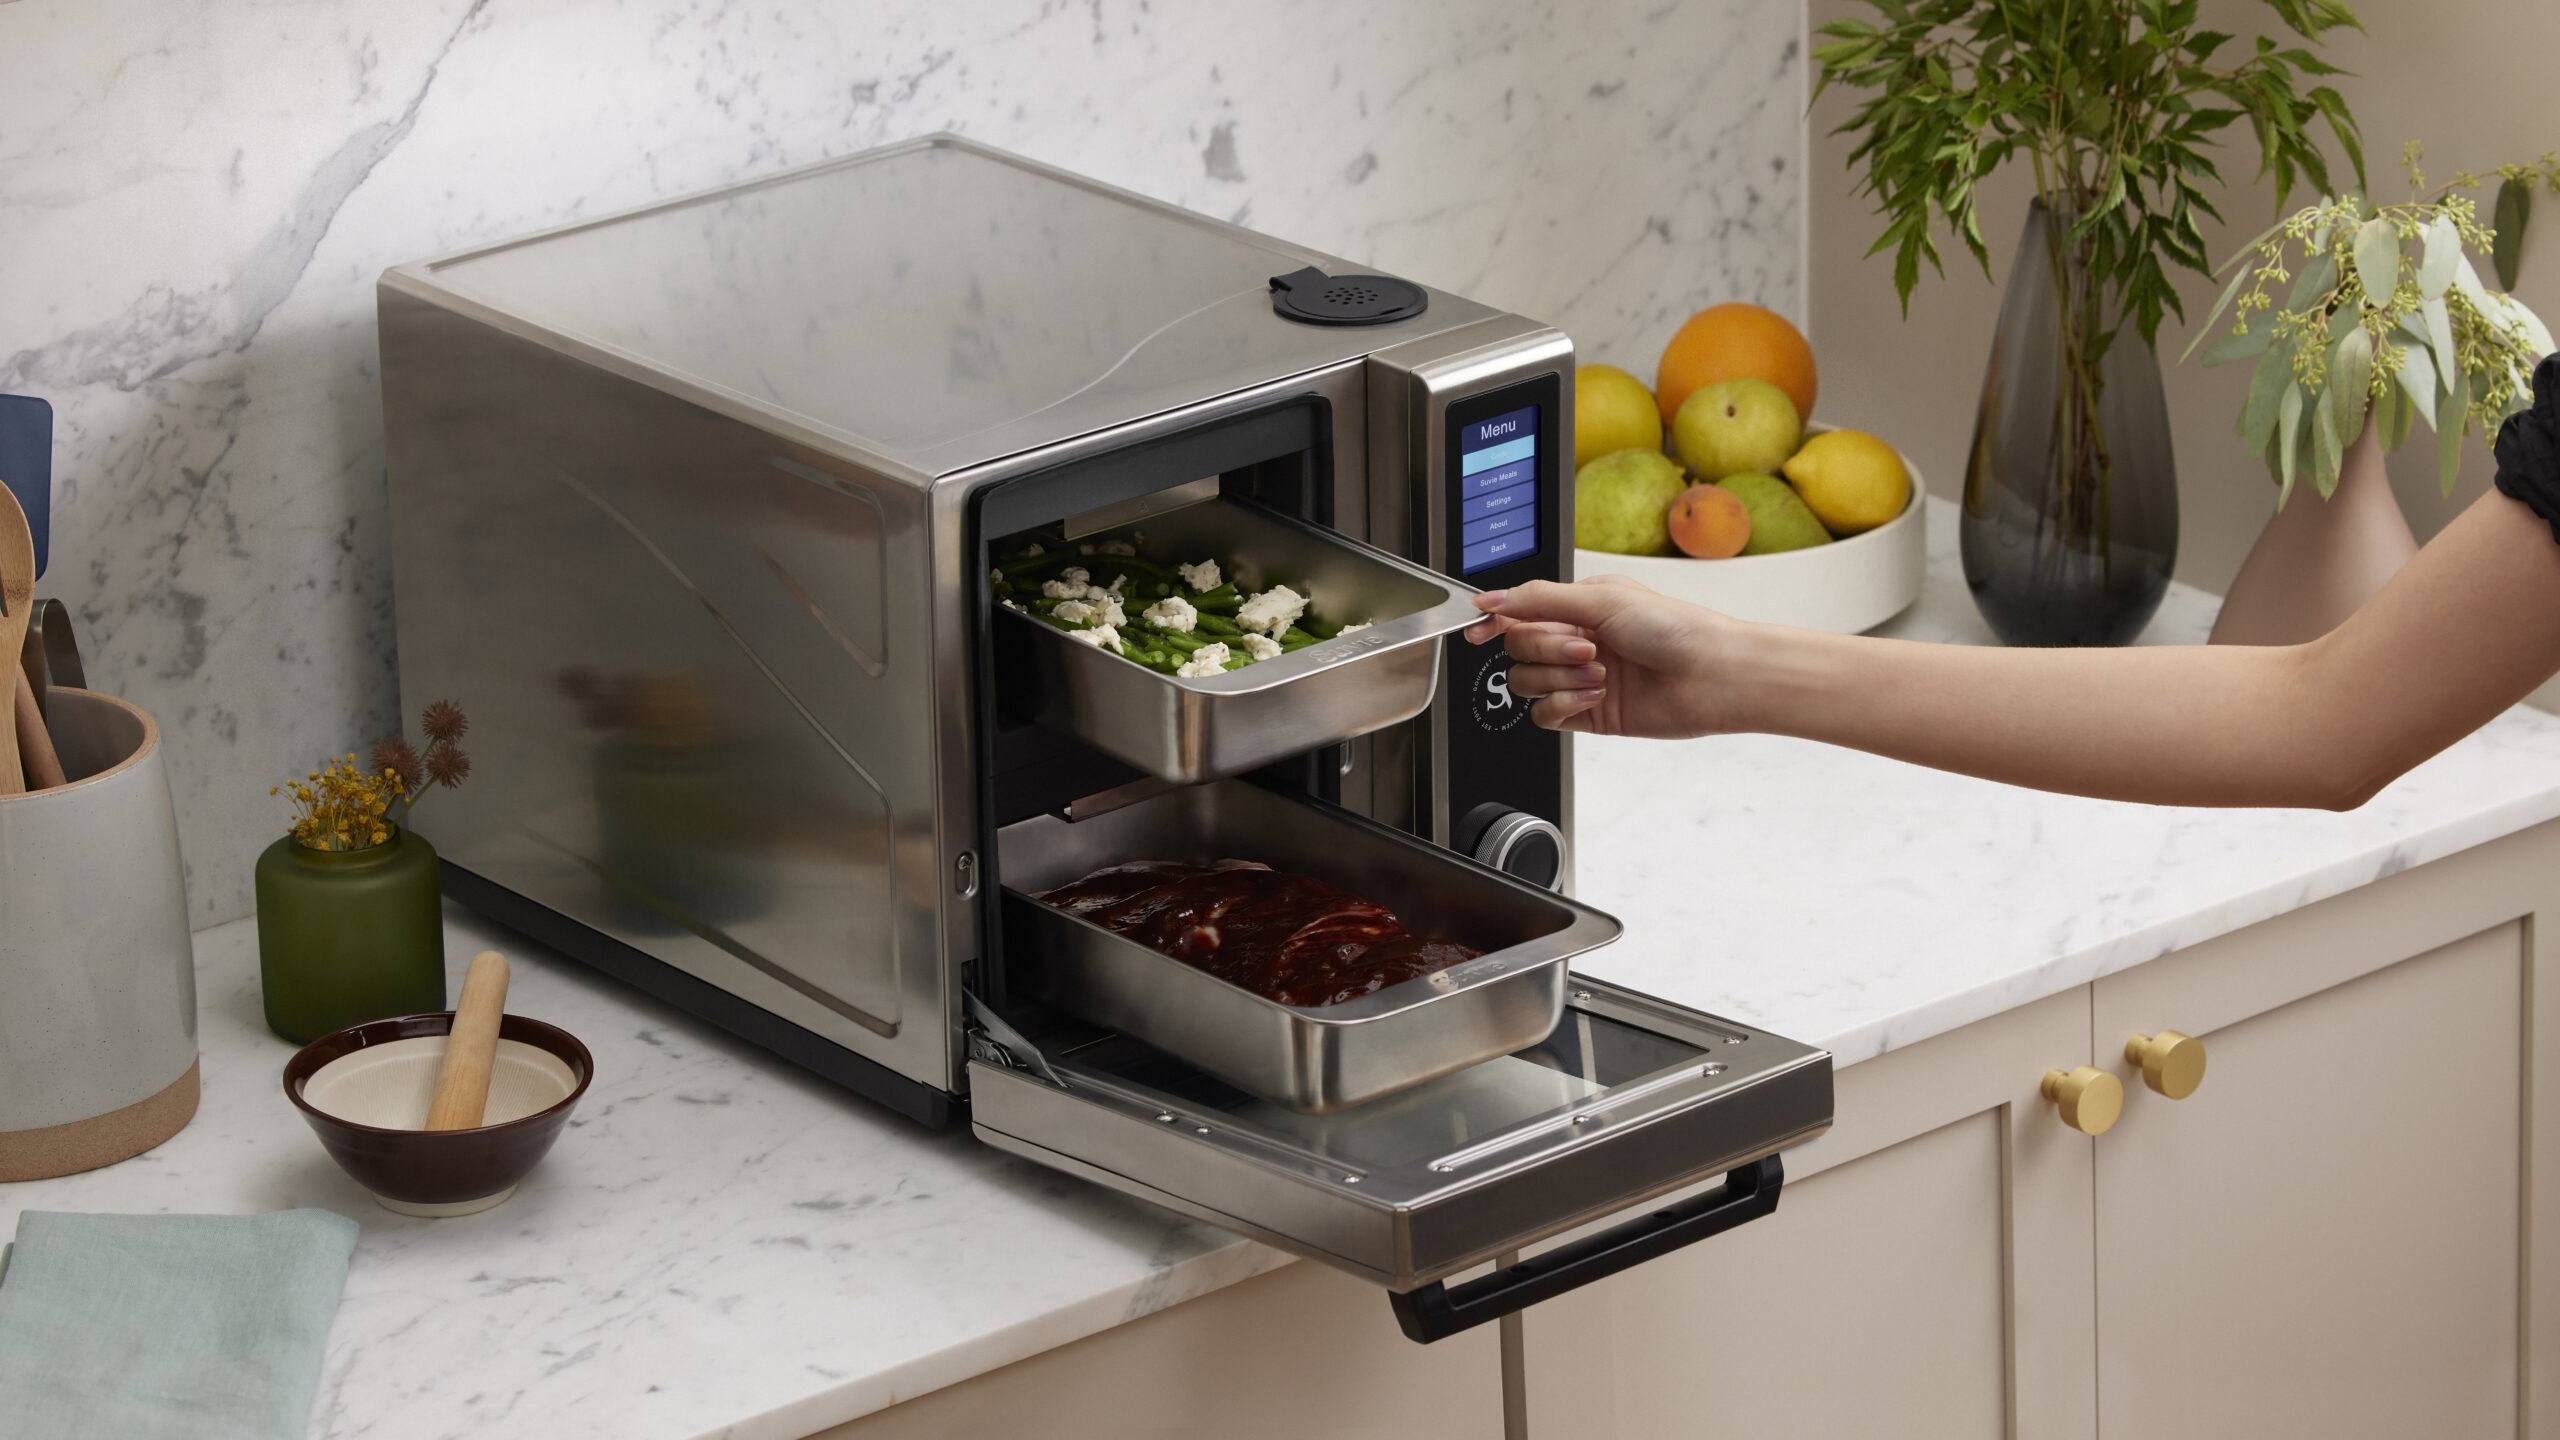 Make Springtime Cooking Easy and Fun with NEW Robotic Cooker Suvie